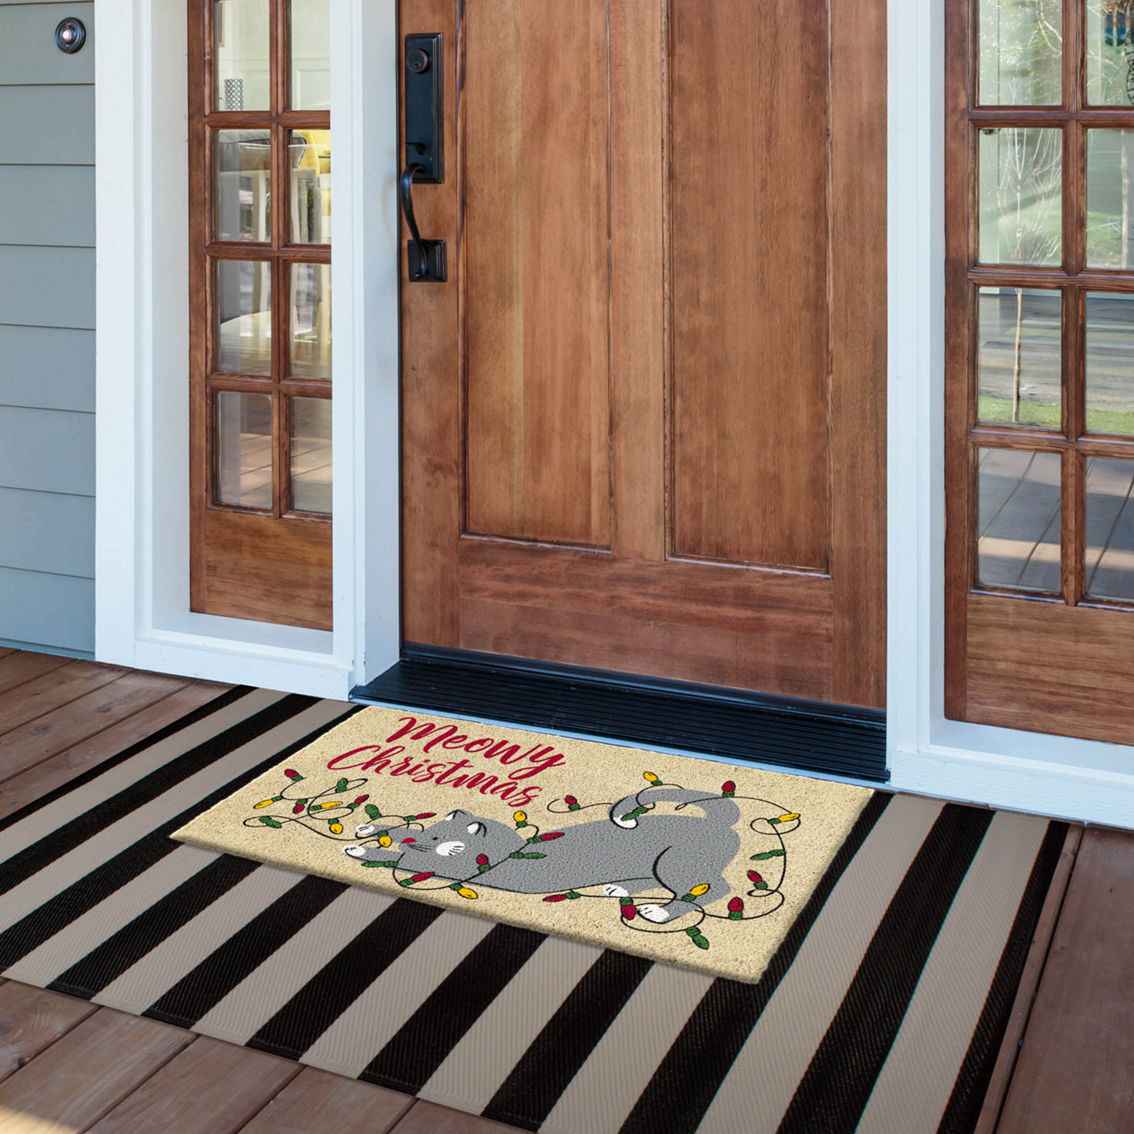 Design Imports Meowy Christmas Doormat - Image 4 of 6